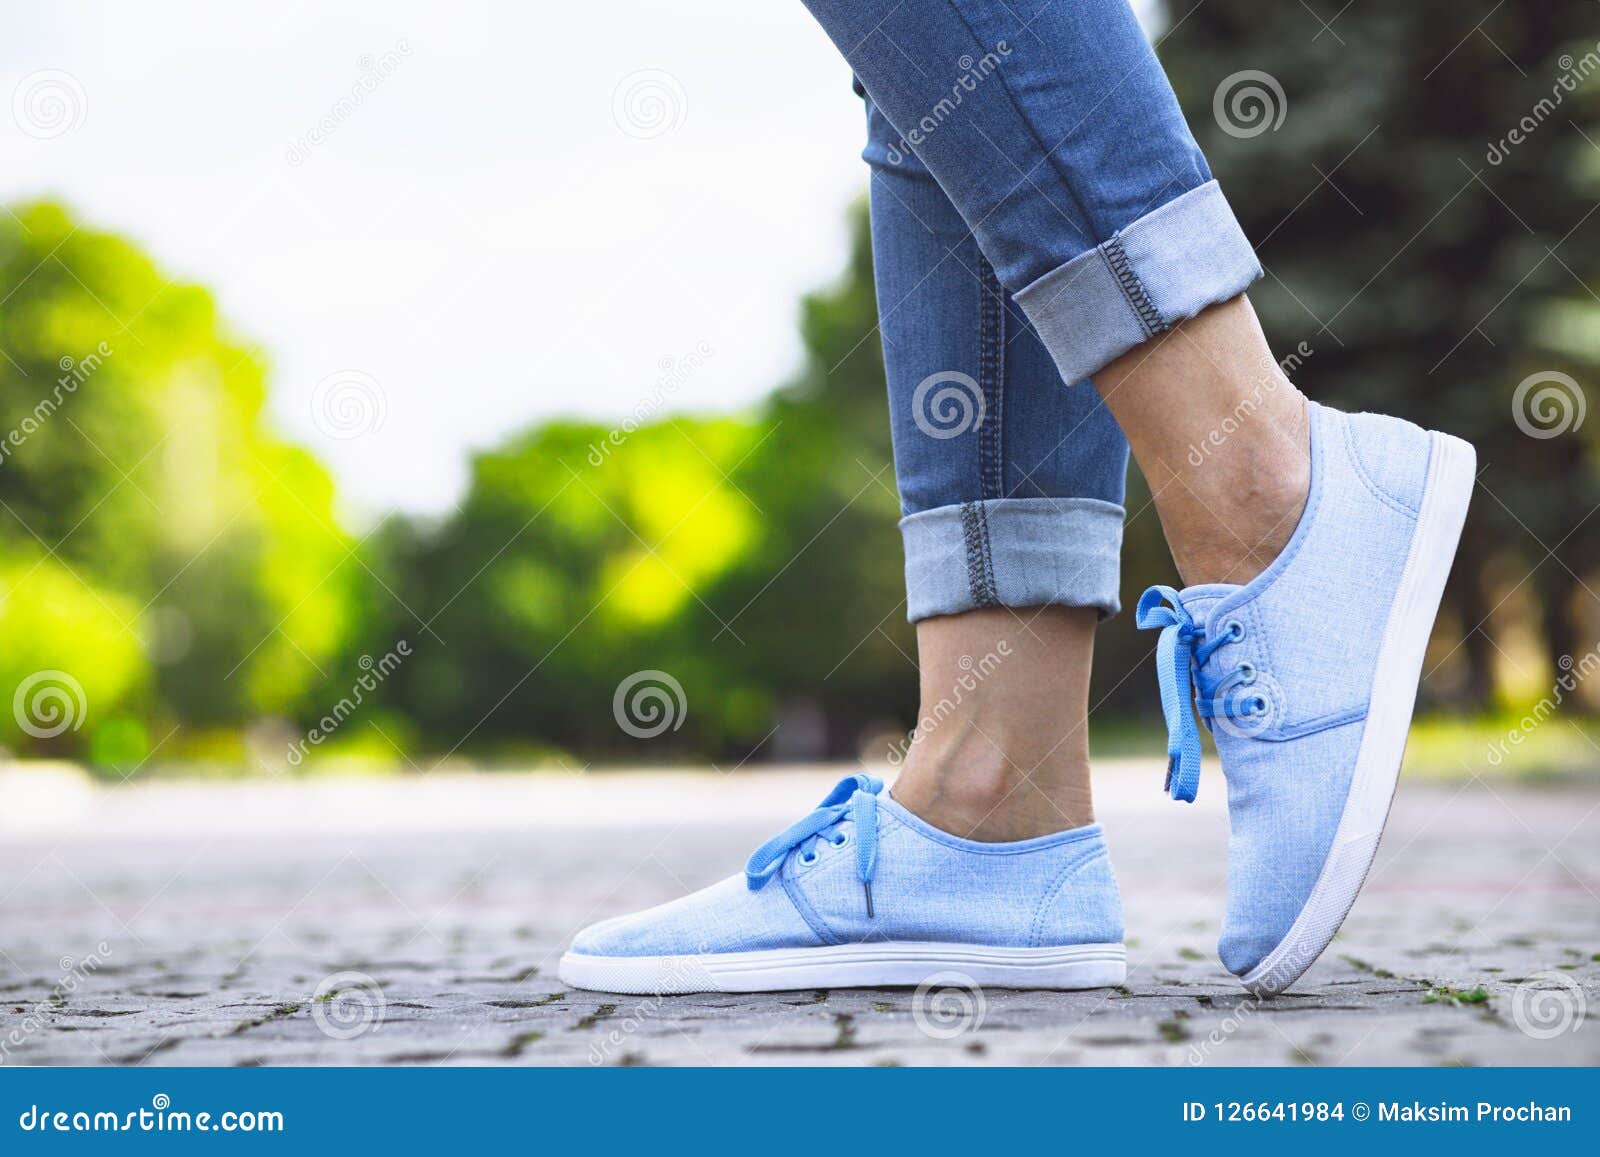 Legs of a Girl in Jeans and Blue Sneakers on a Sidewalk Tile, a Young ...